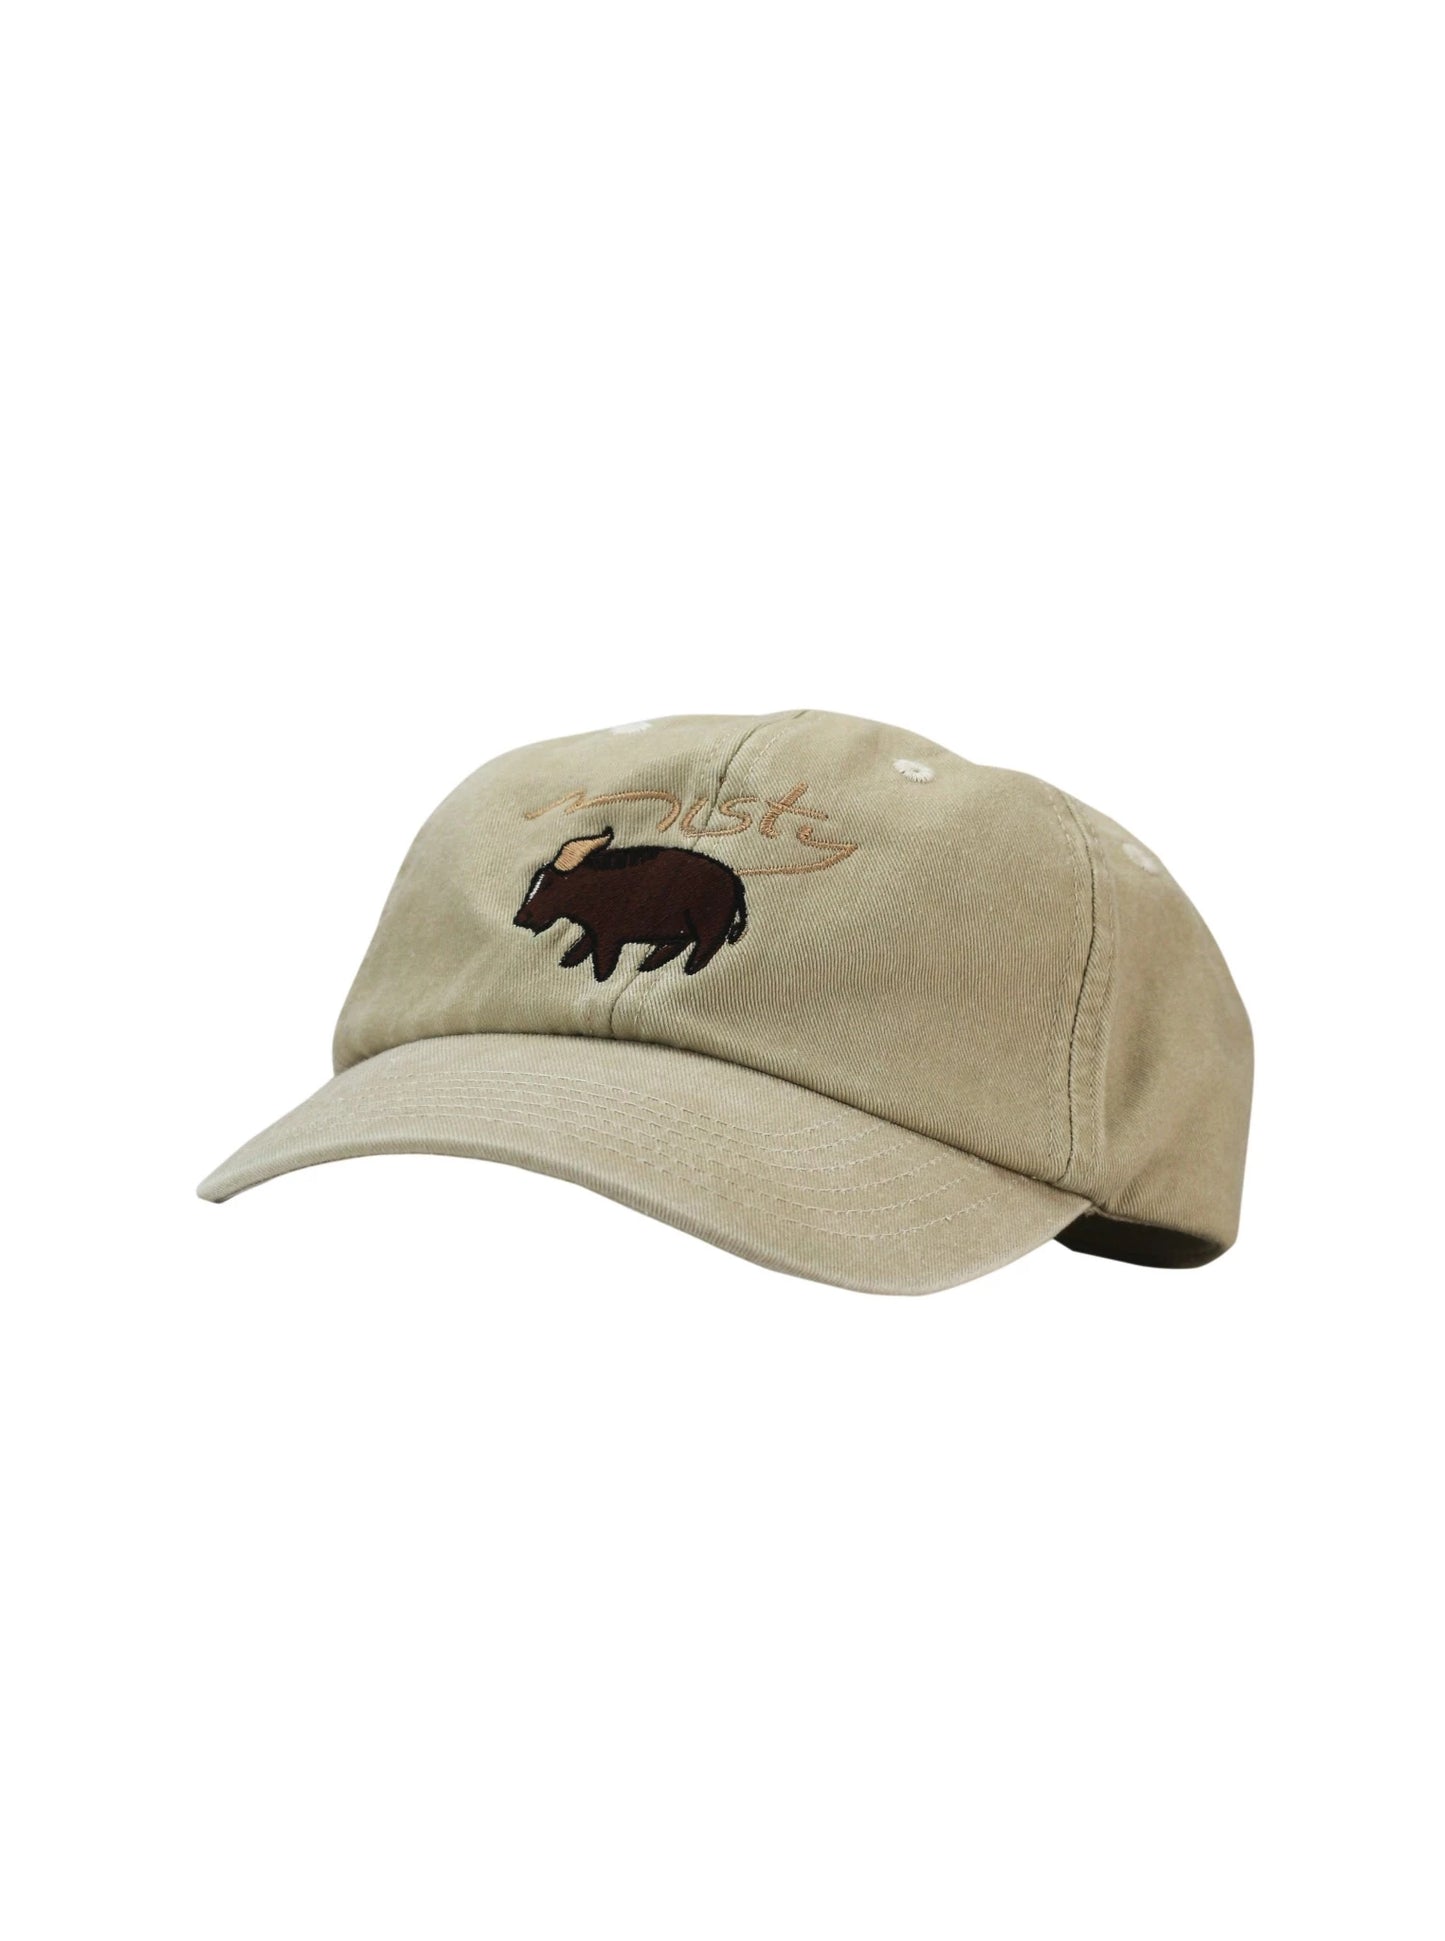 Load image into Gallery viewer, Cotton cap in stone with yak logo from Misty Cashmere
